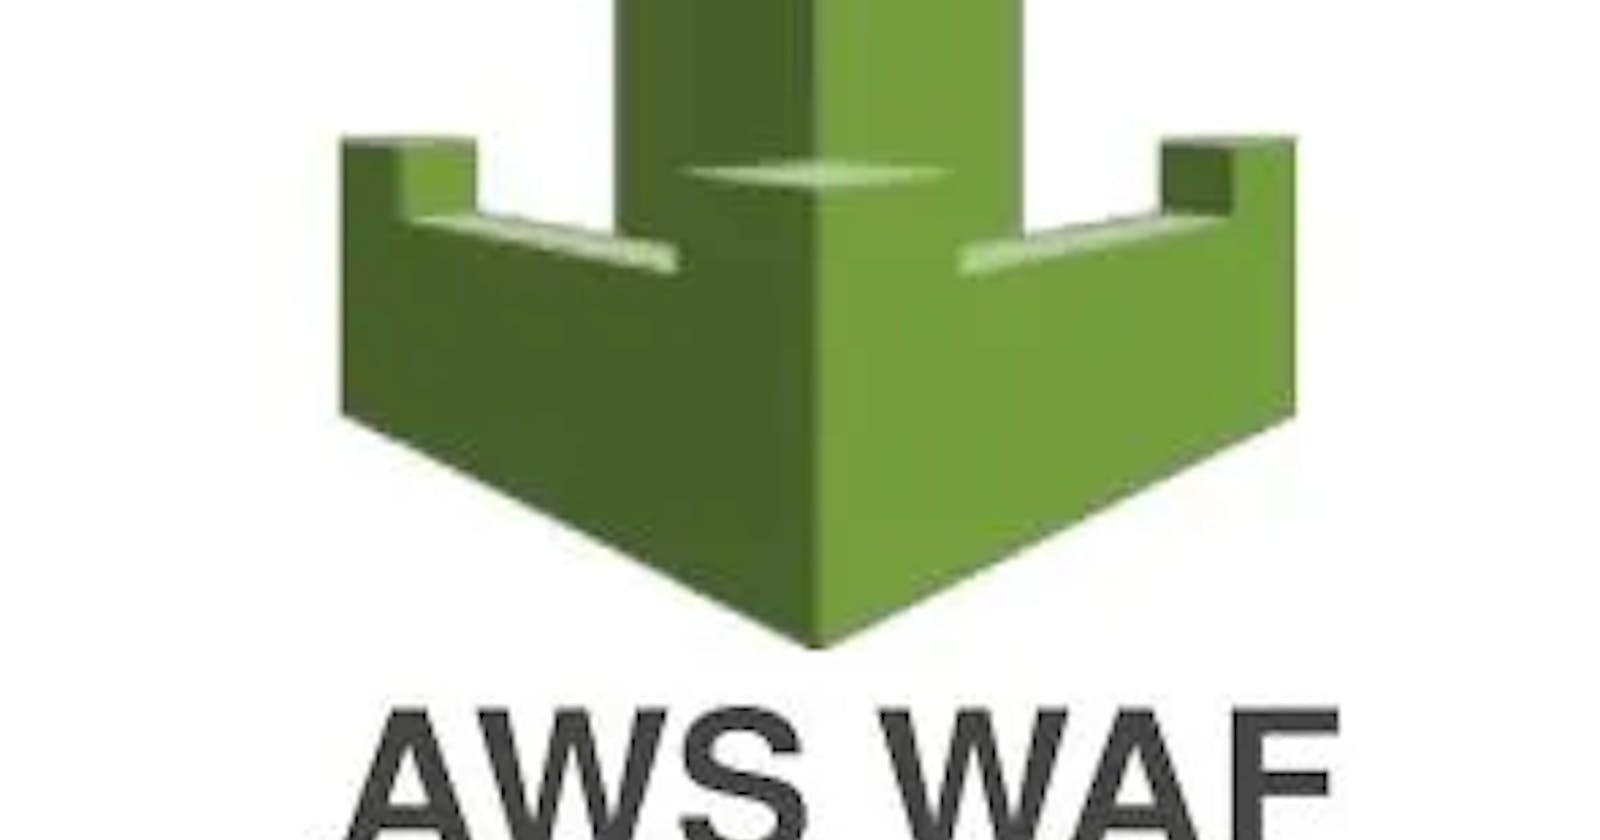 Securing Your Applications: Deploying AWS WAF with Terraform